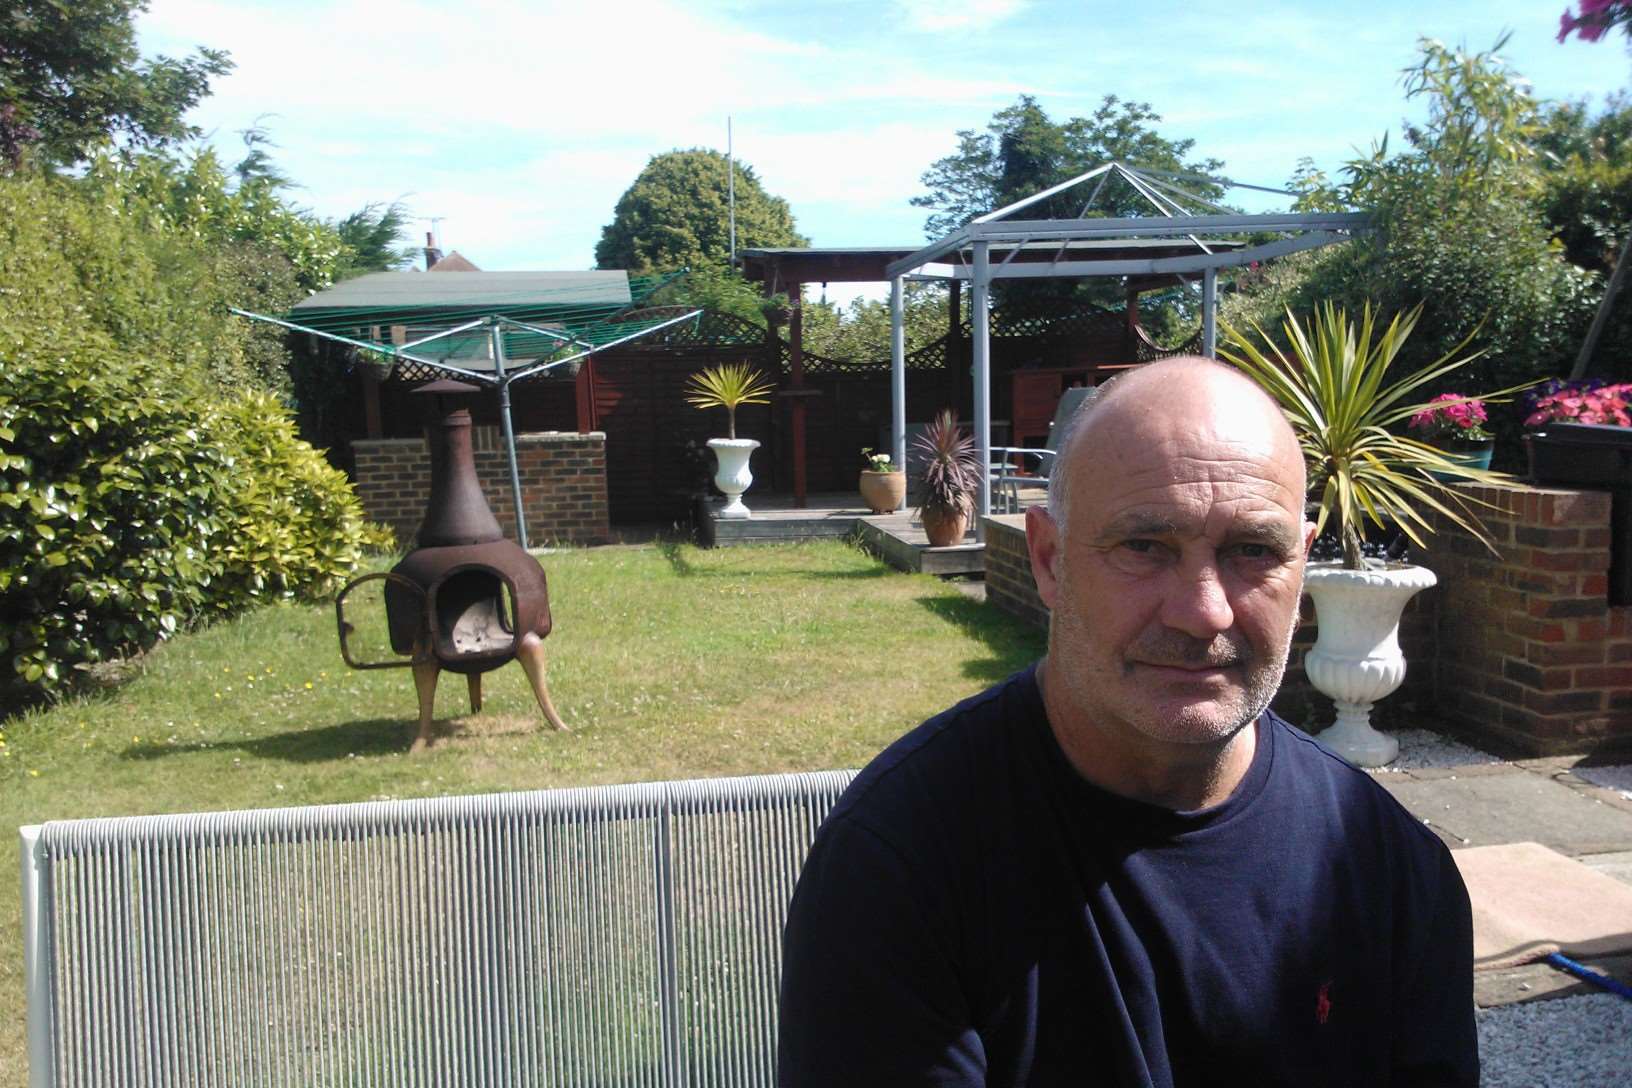 Glenn Whitehead, 53, a scaffolder from Woodlands Rise, Swanley who escaped death after fleeing from gun fire in a terrorist attack at a holiday resort in Tunisia